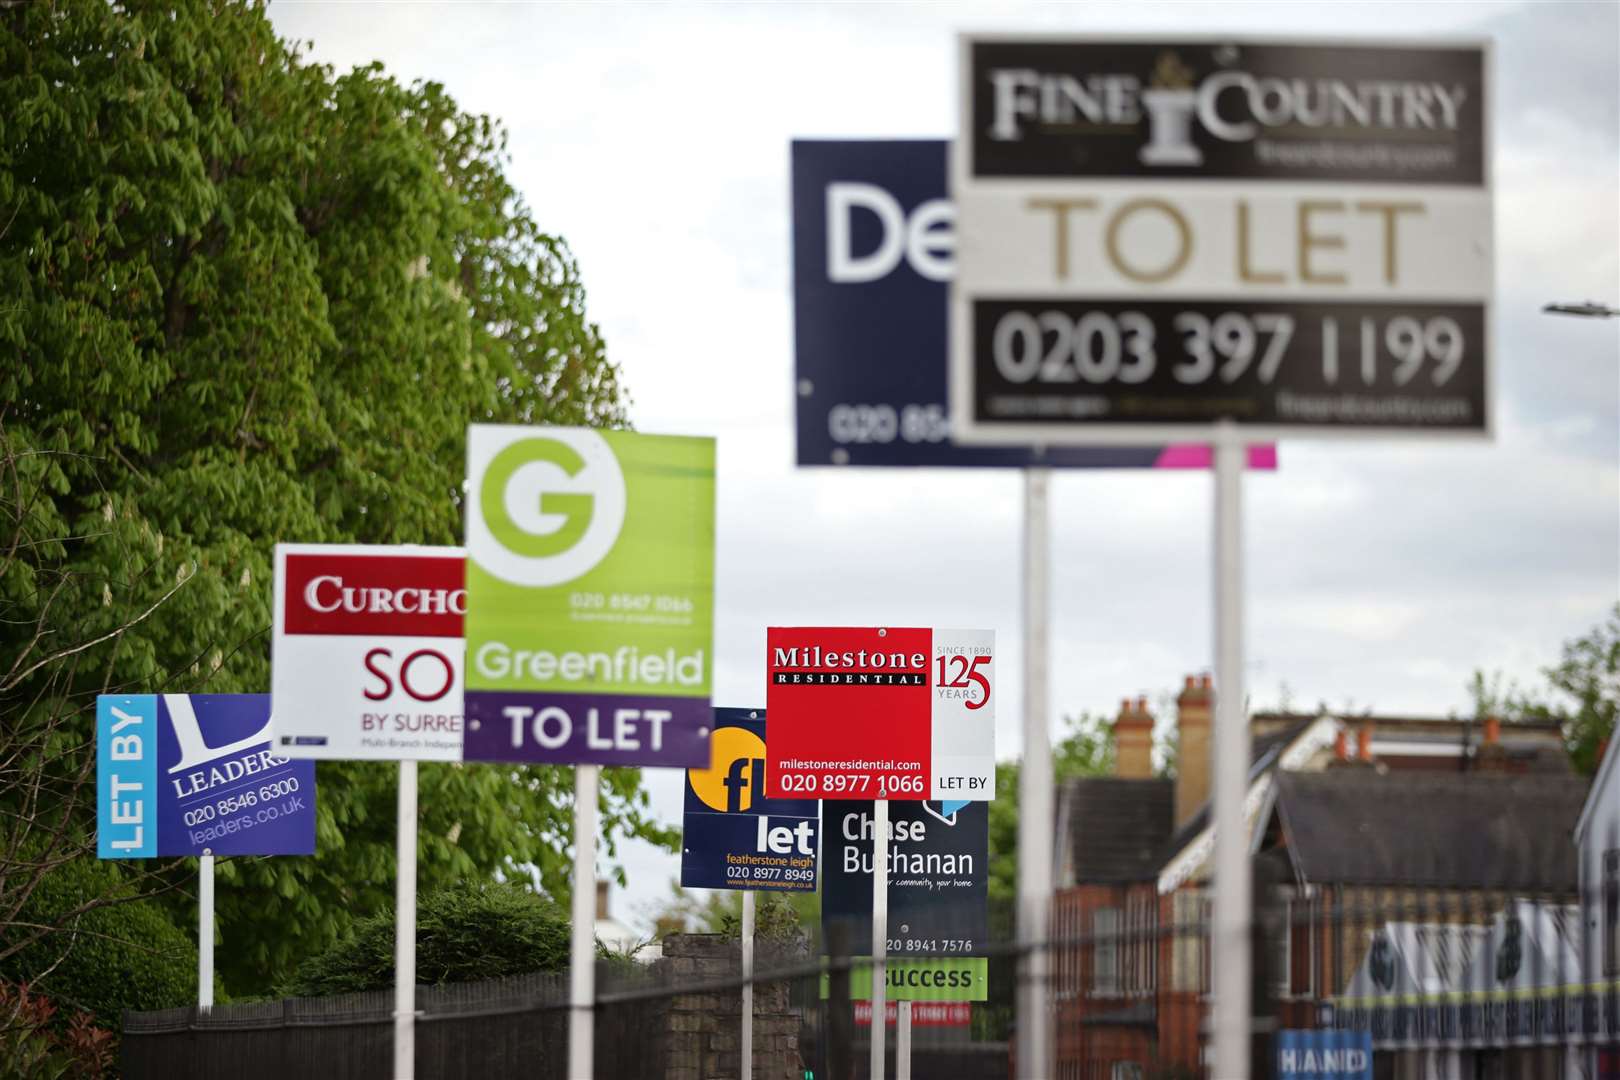 House prices in the South East could fall 11%, slightly better than the predicted UK average of 13%